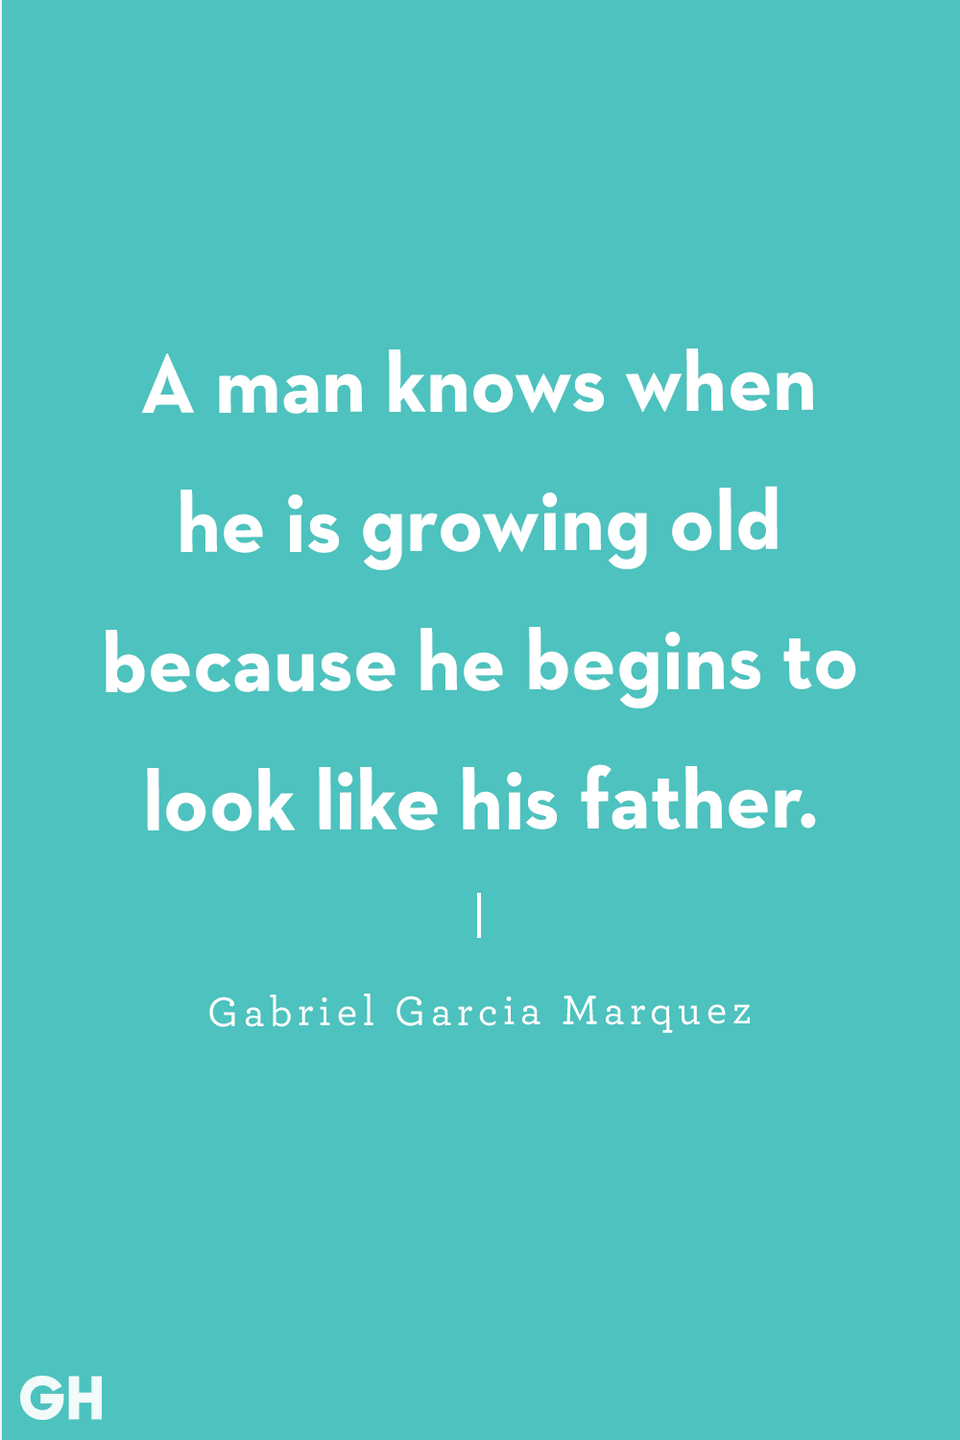 <p>"A man knows when he is growing old because he begins to look like his father."</p>